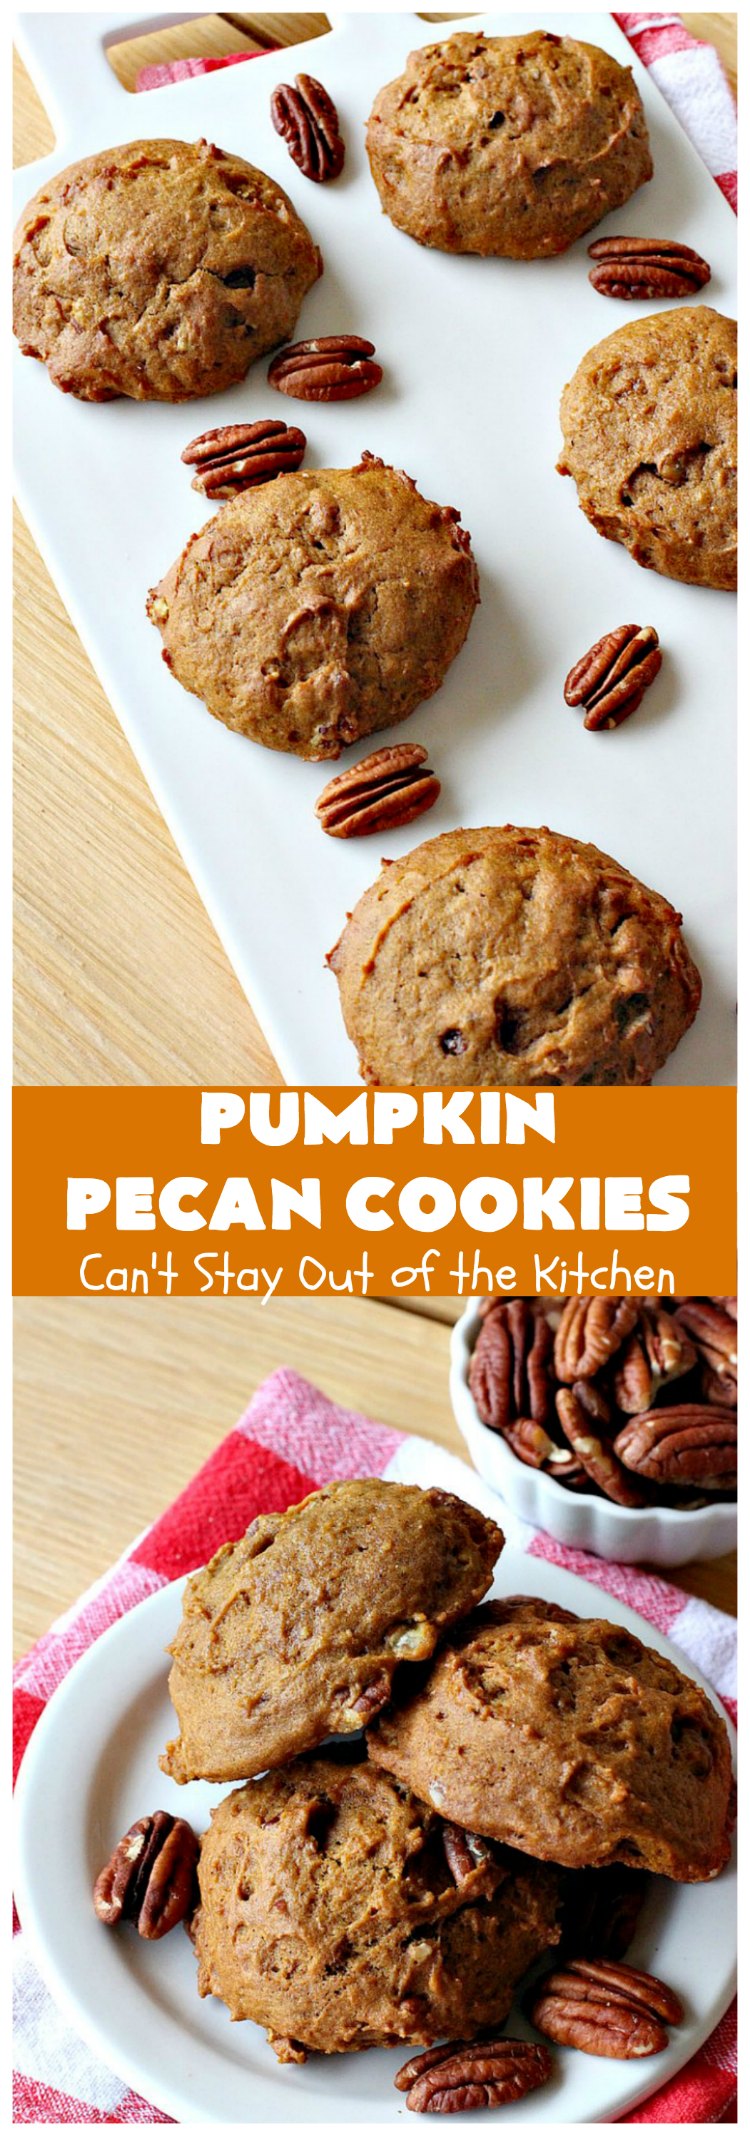 Pumpkin Pecan Cookies | Can't Stay Out of the Kitchen